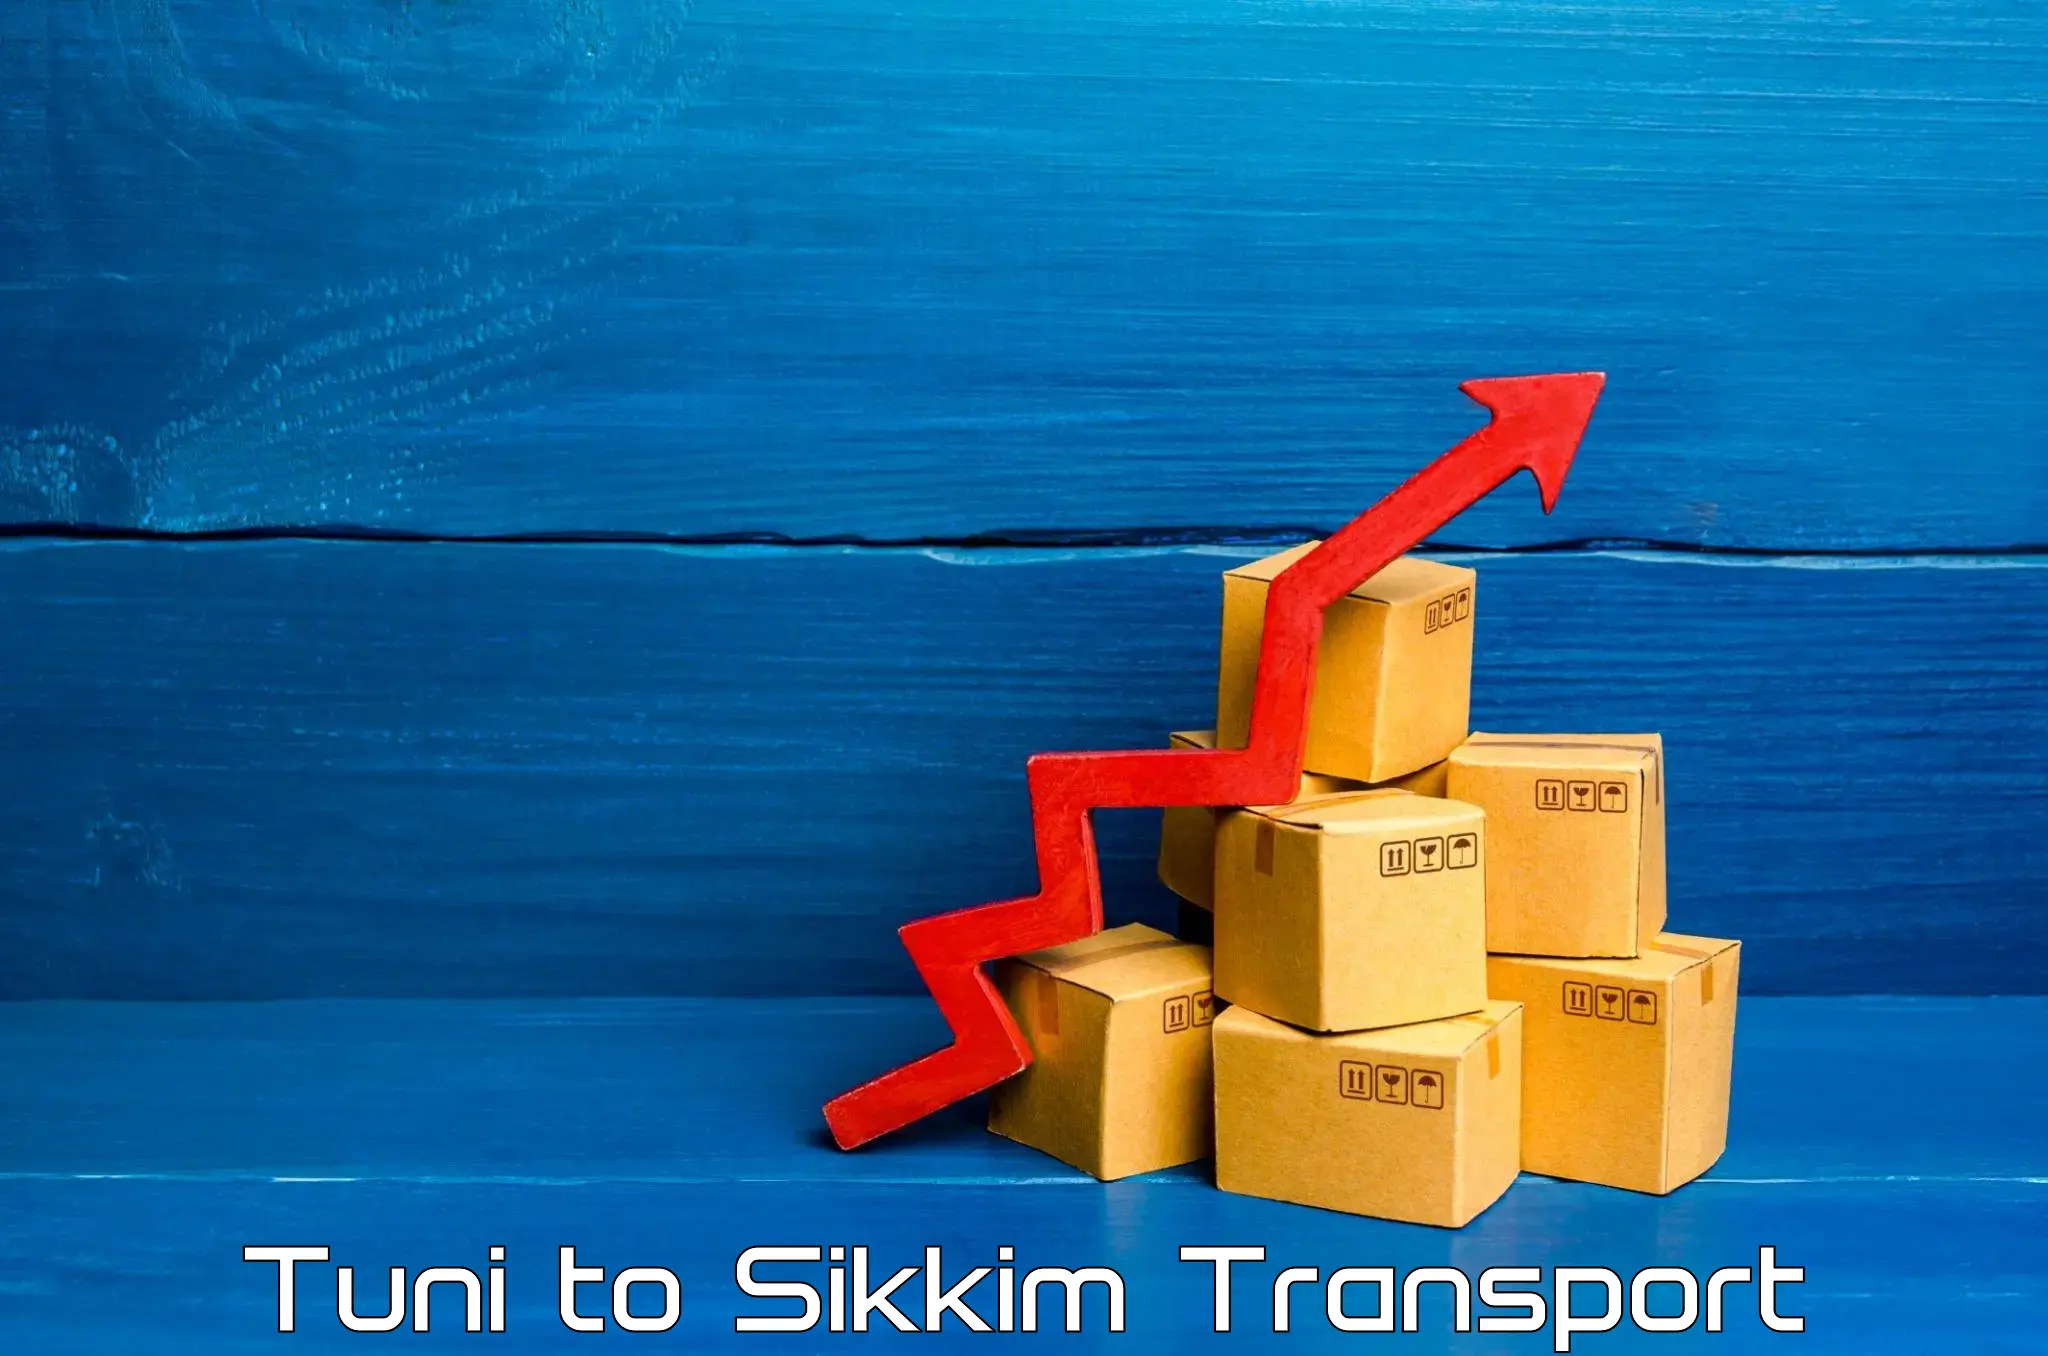 Cycle transportation service Tuni to South Sikkim